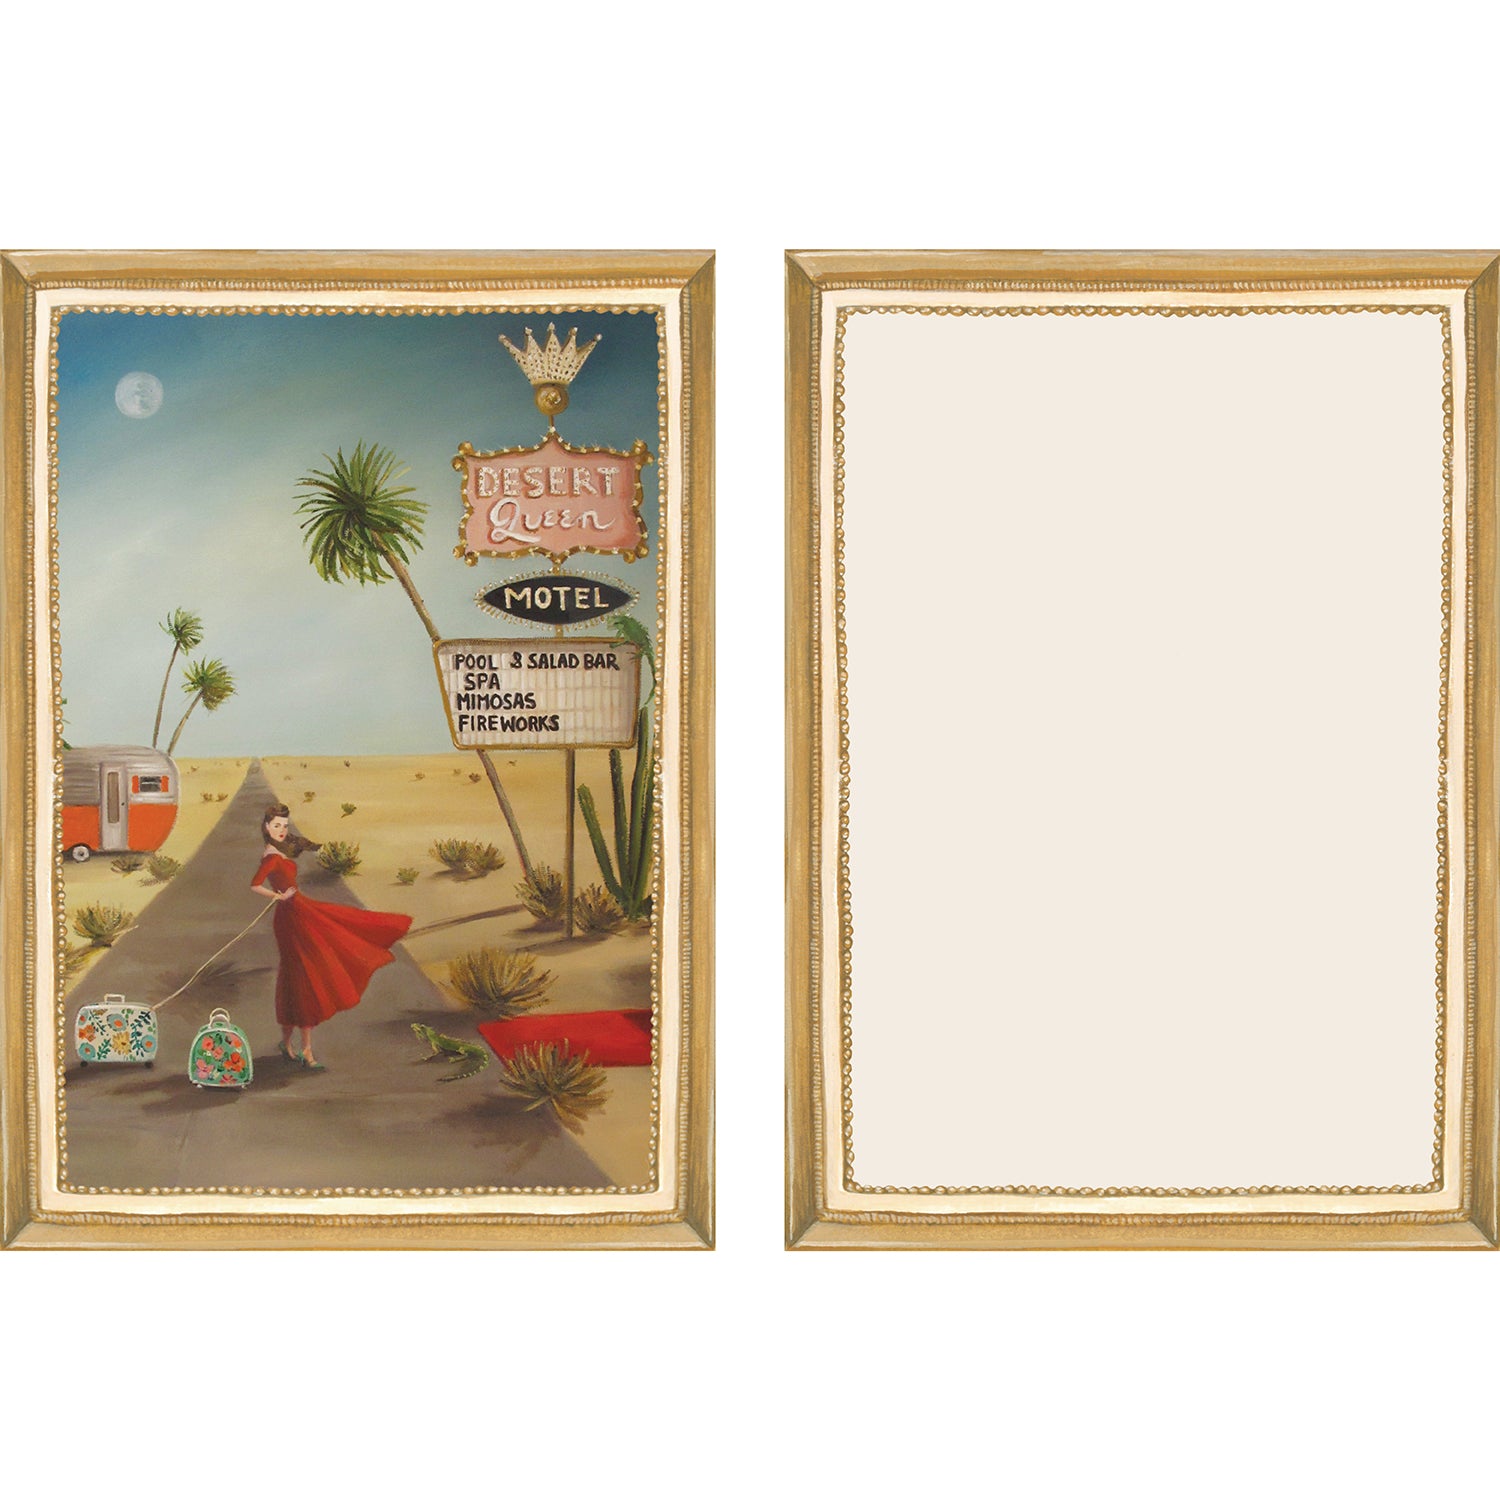 The illustrated front and blank back of a Flat Note, both sides framed in gold, featuring a painterly illustration of a woman in a red dress pulling her suitcase across a desert road toward a sign that reads &quot;Desert Queen Motel&quot;.